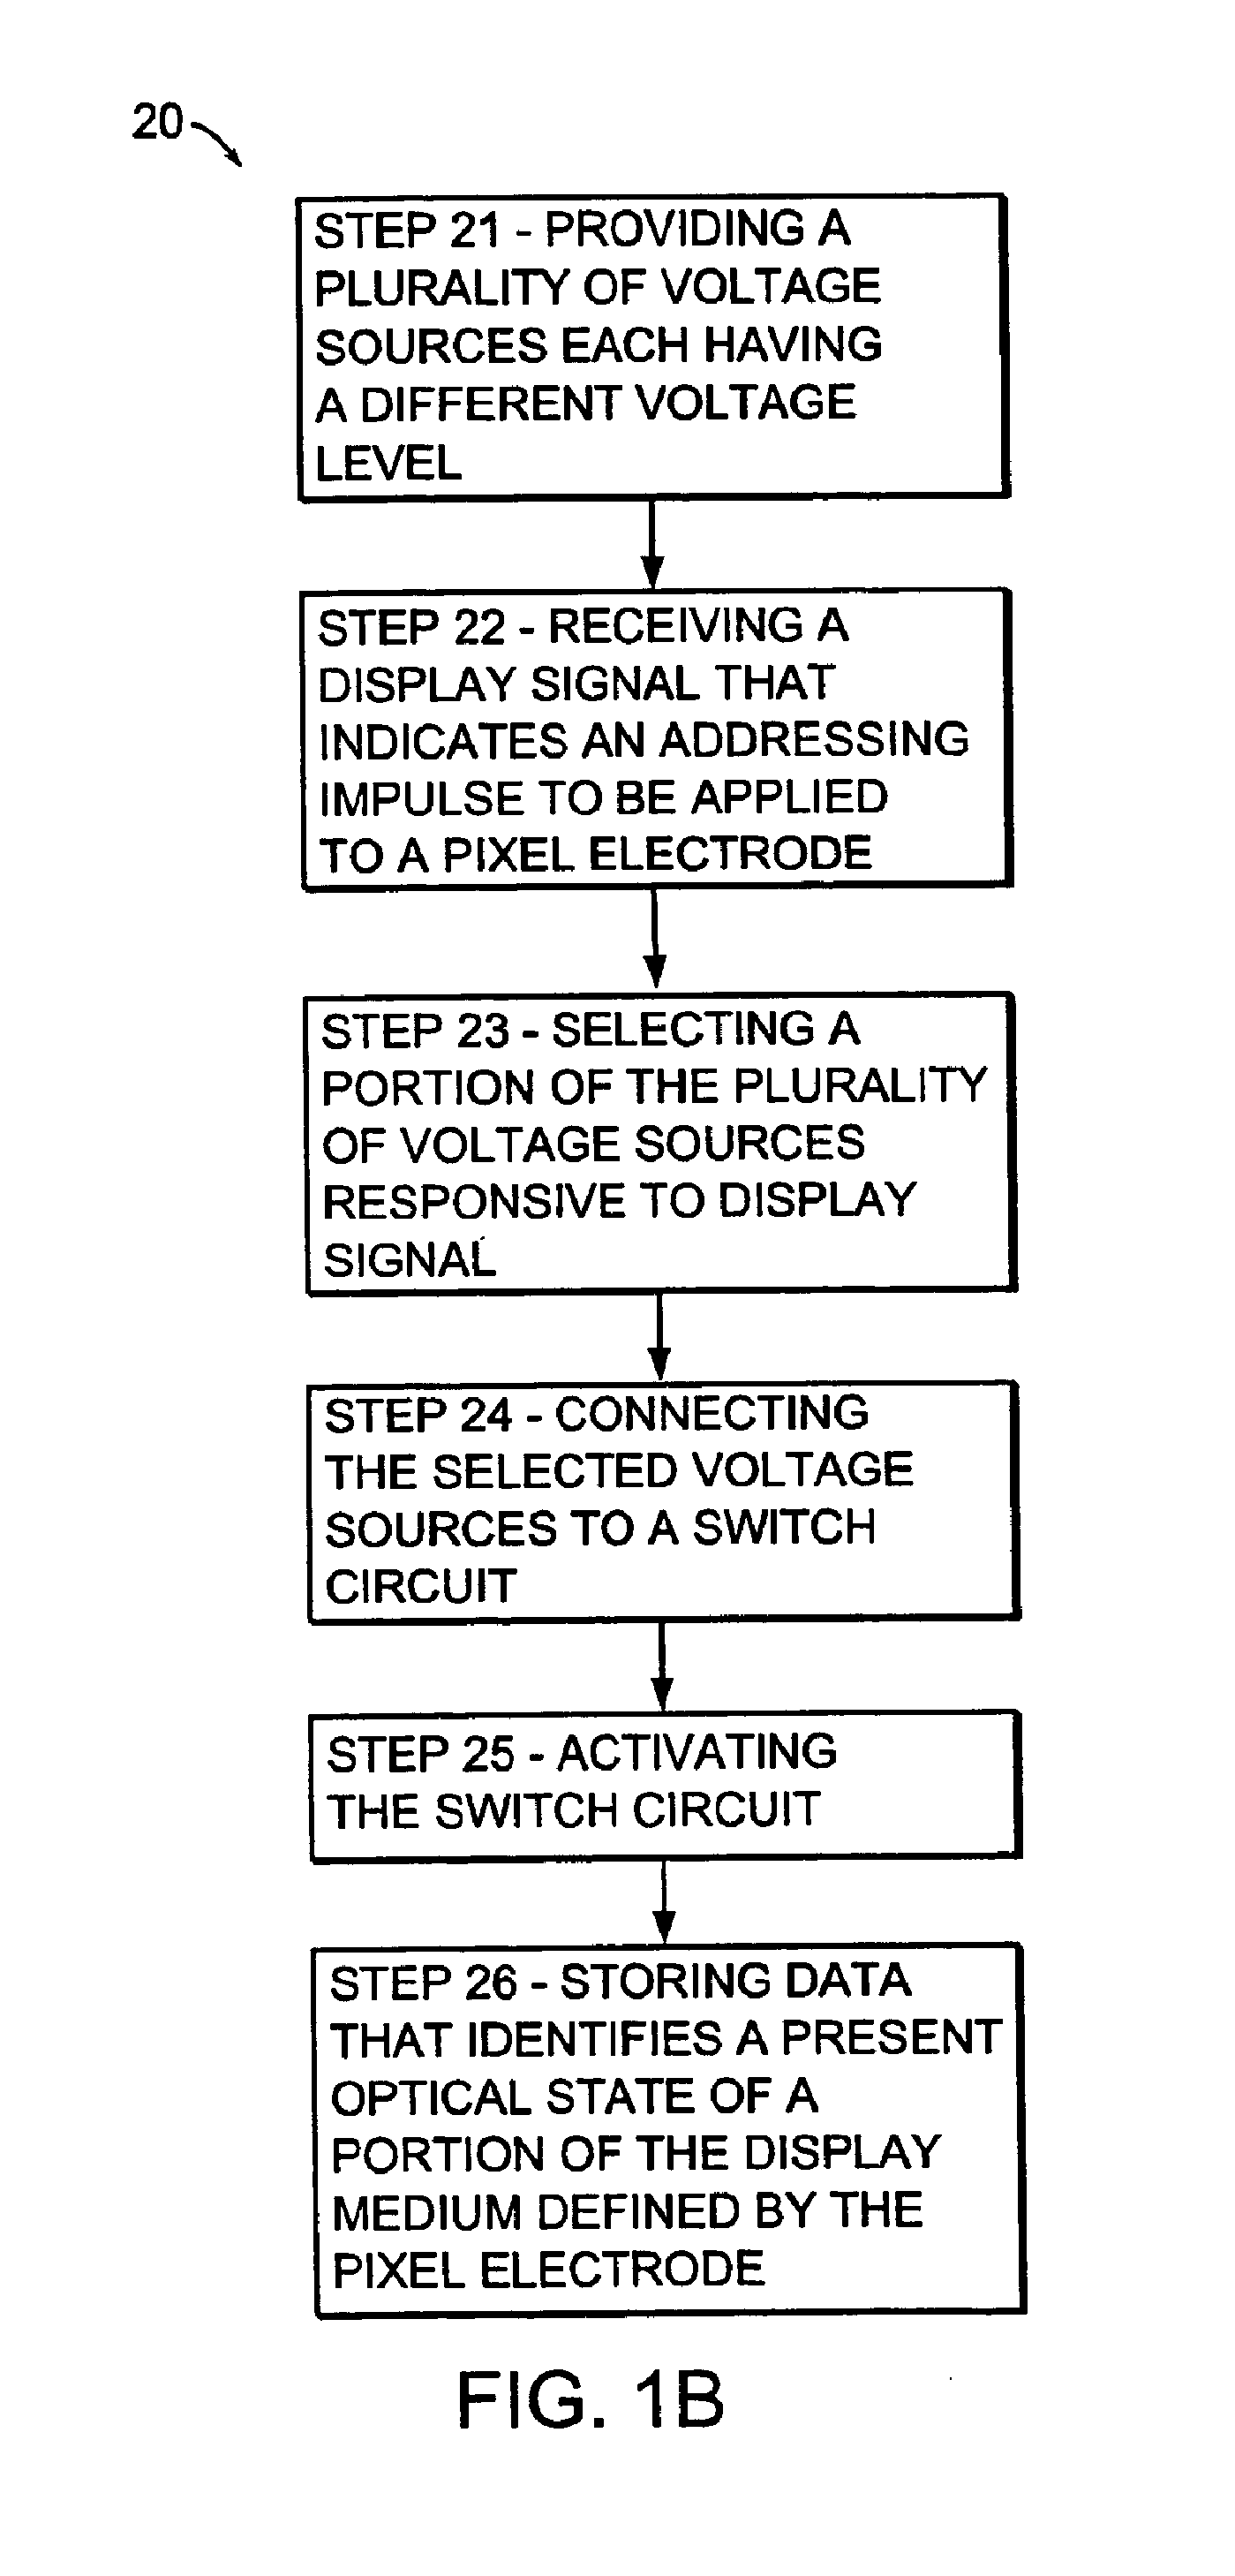 Voltage modulated driver circuits for electro-optic displays